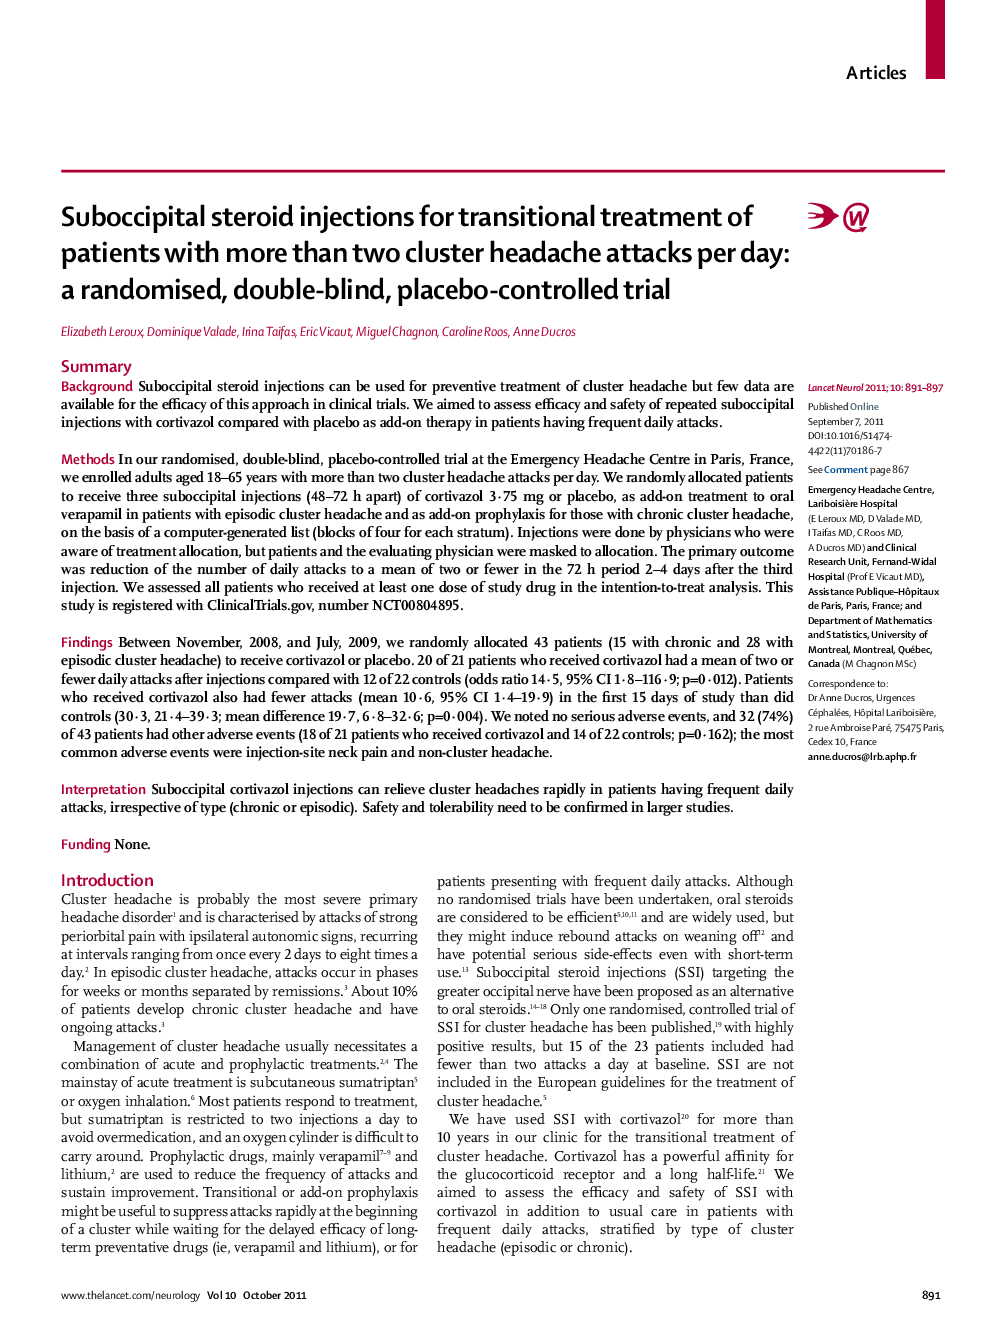 Suboccipital steroid injections for transitional treatment of patients with more than two cluster headache attacks per day: a randomised, double-blind, placebo-controlled trial